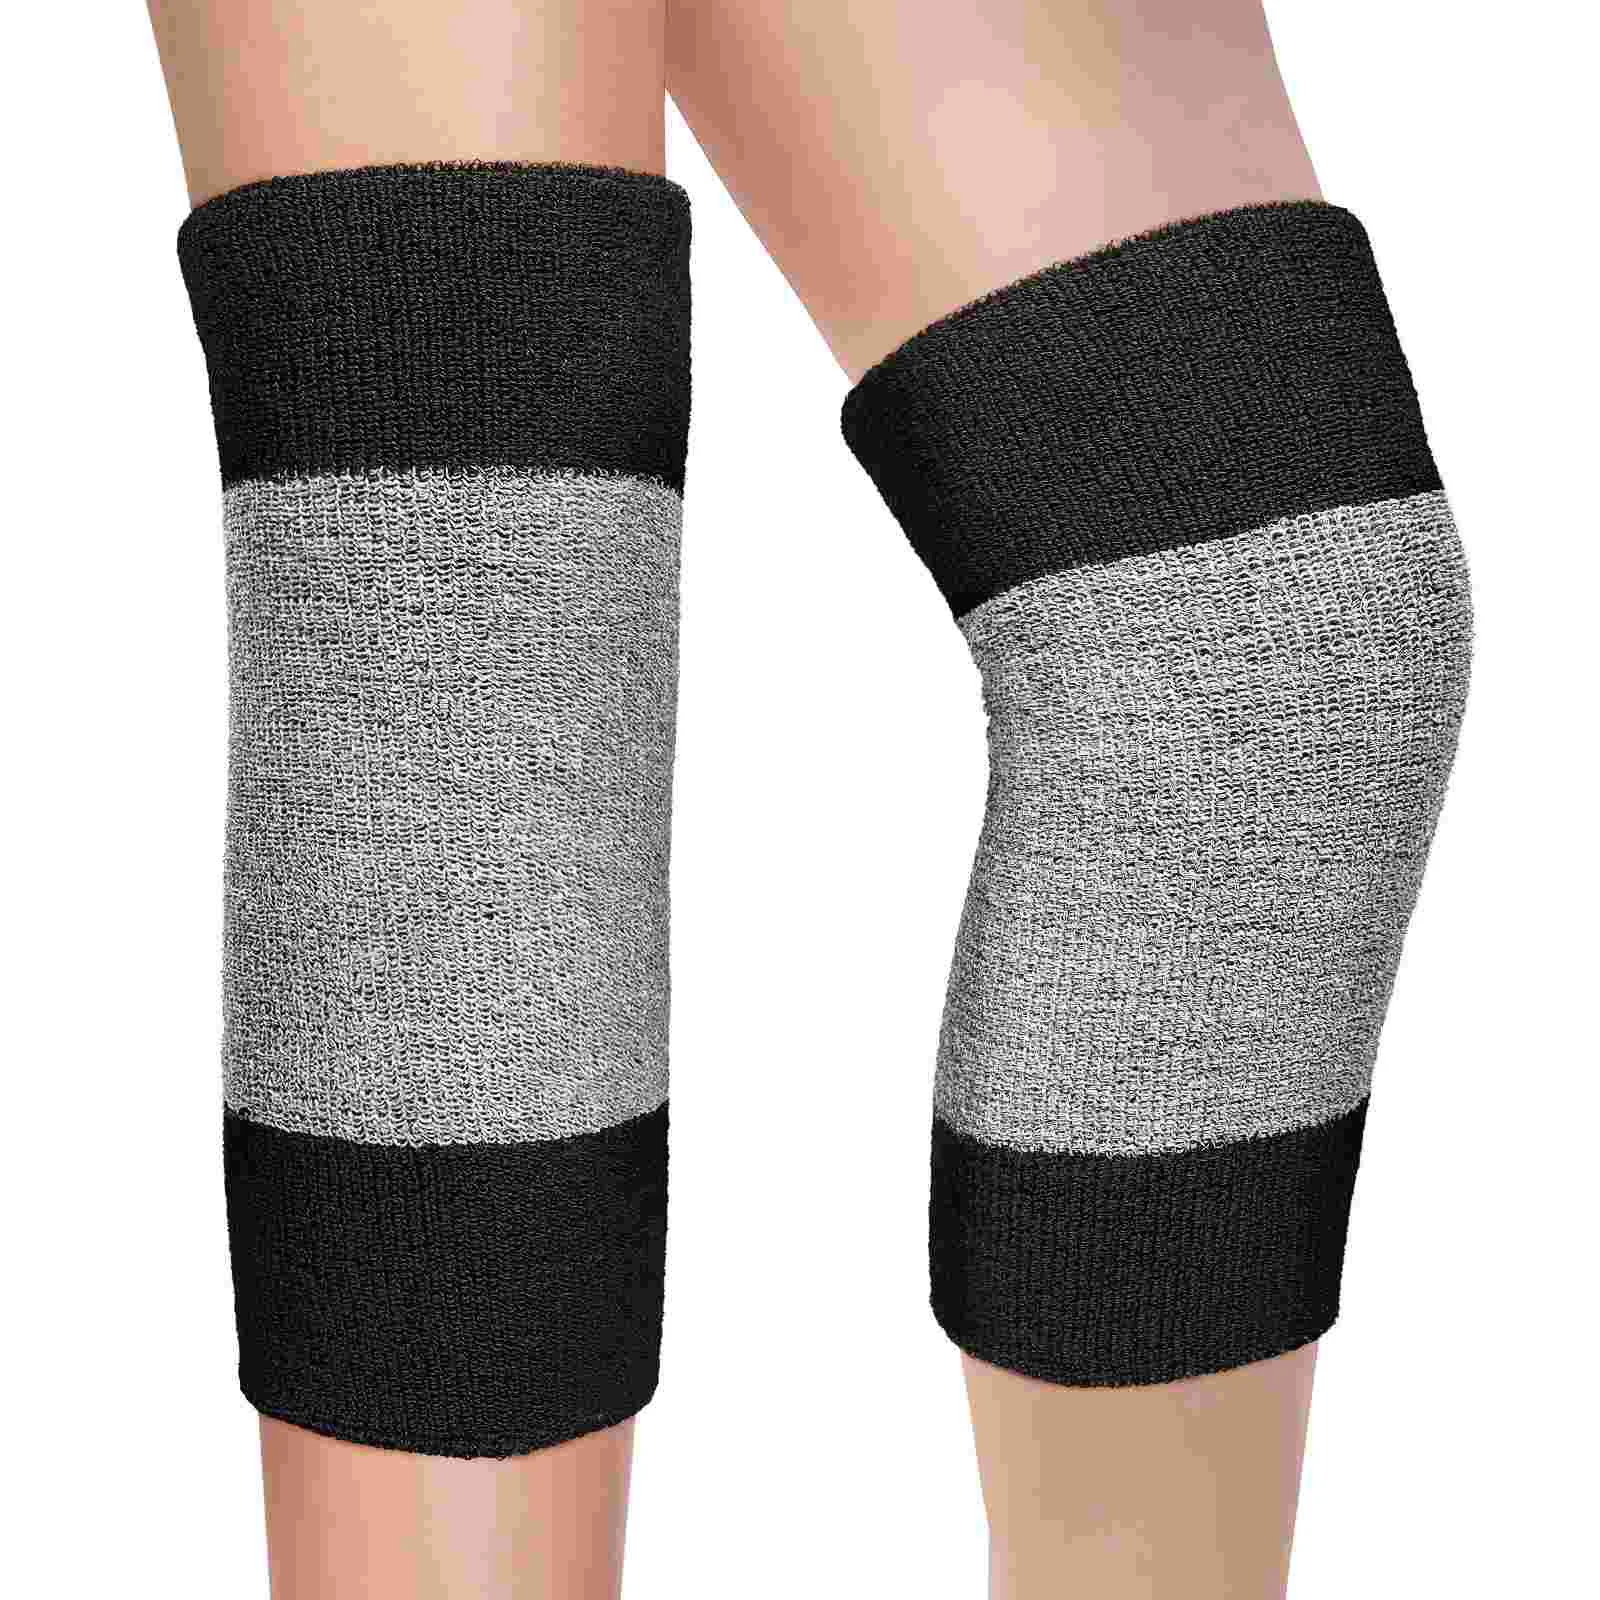 Breathable Knee Sleeves Fitness Knee Support Winter Thermal Warm Knee Pads For Sports Pain Relief